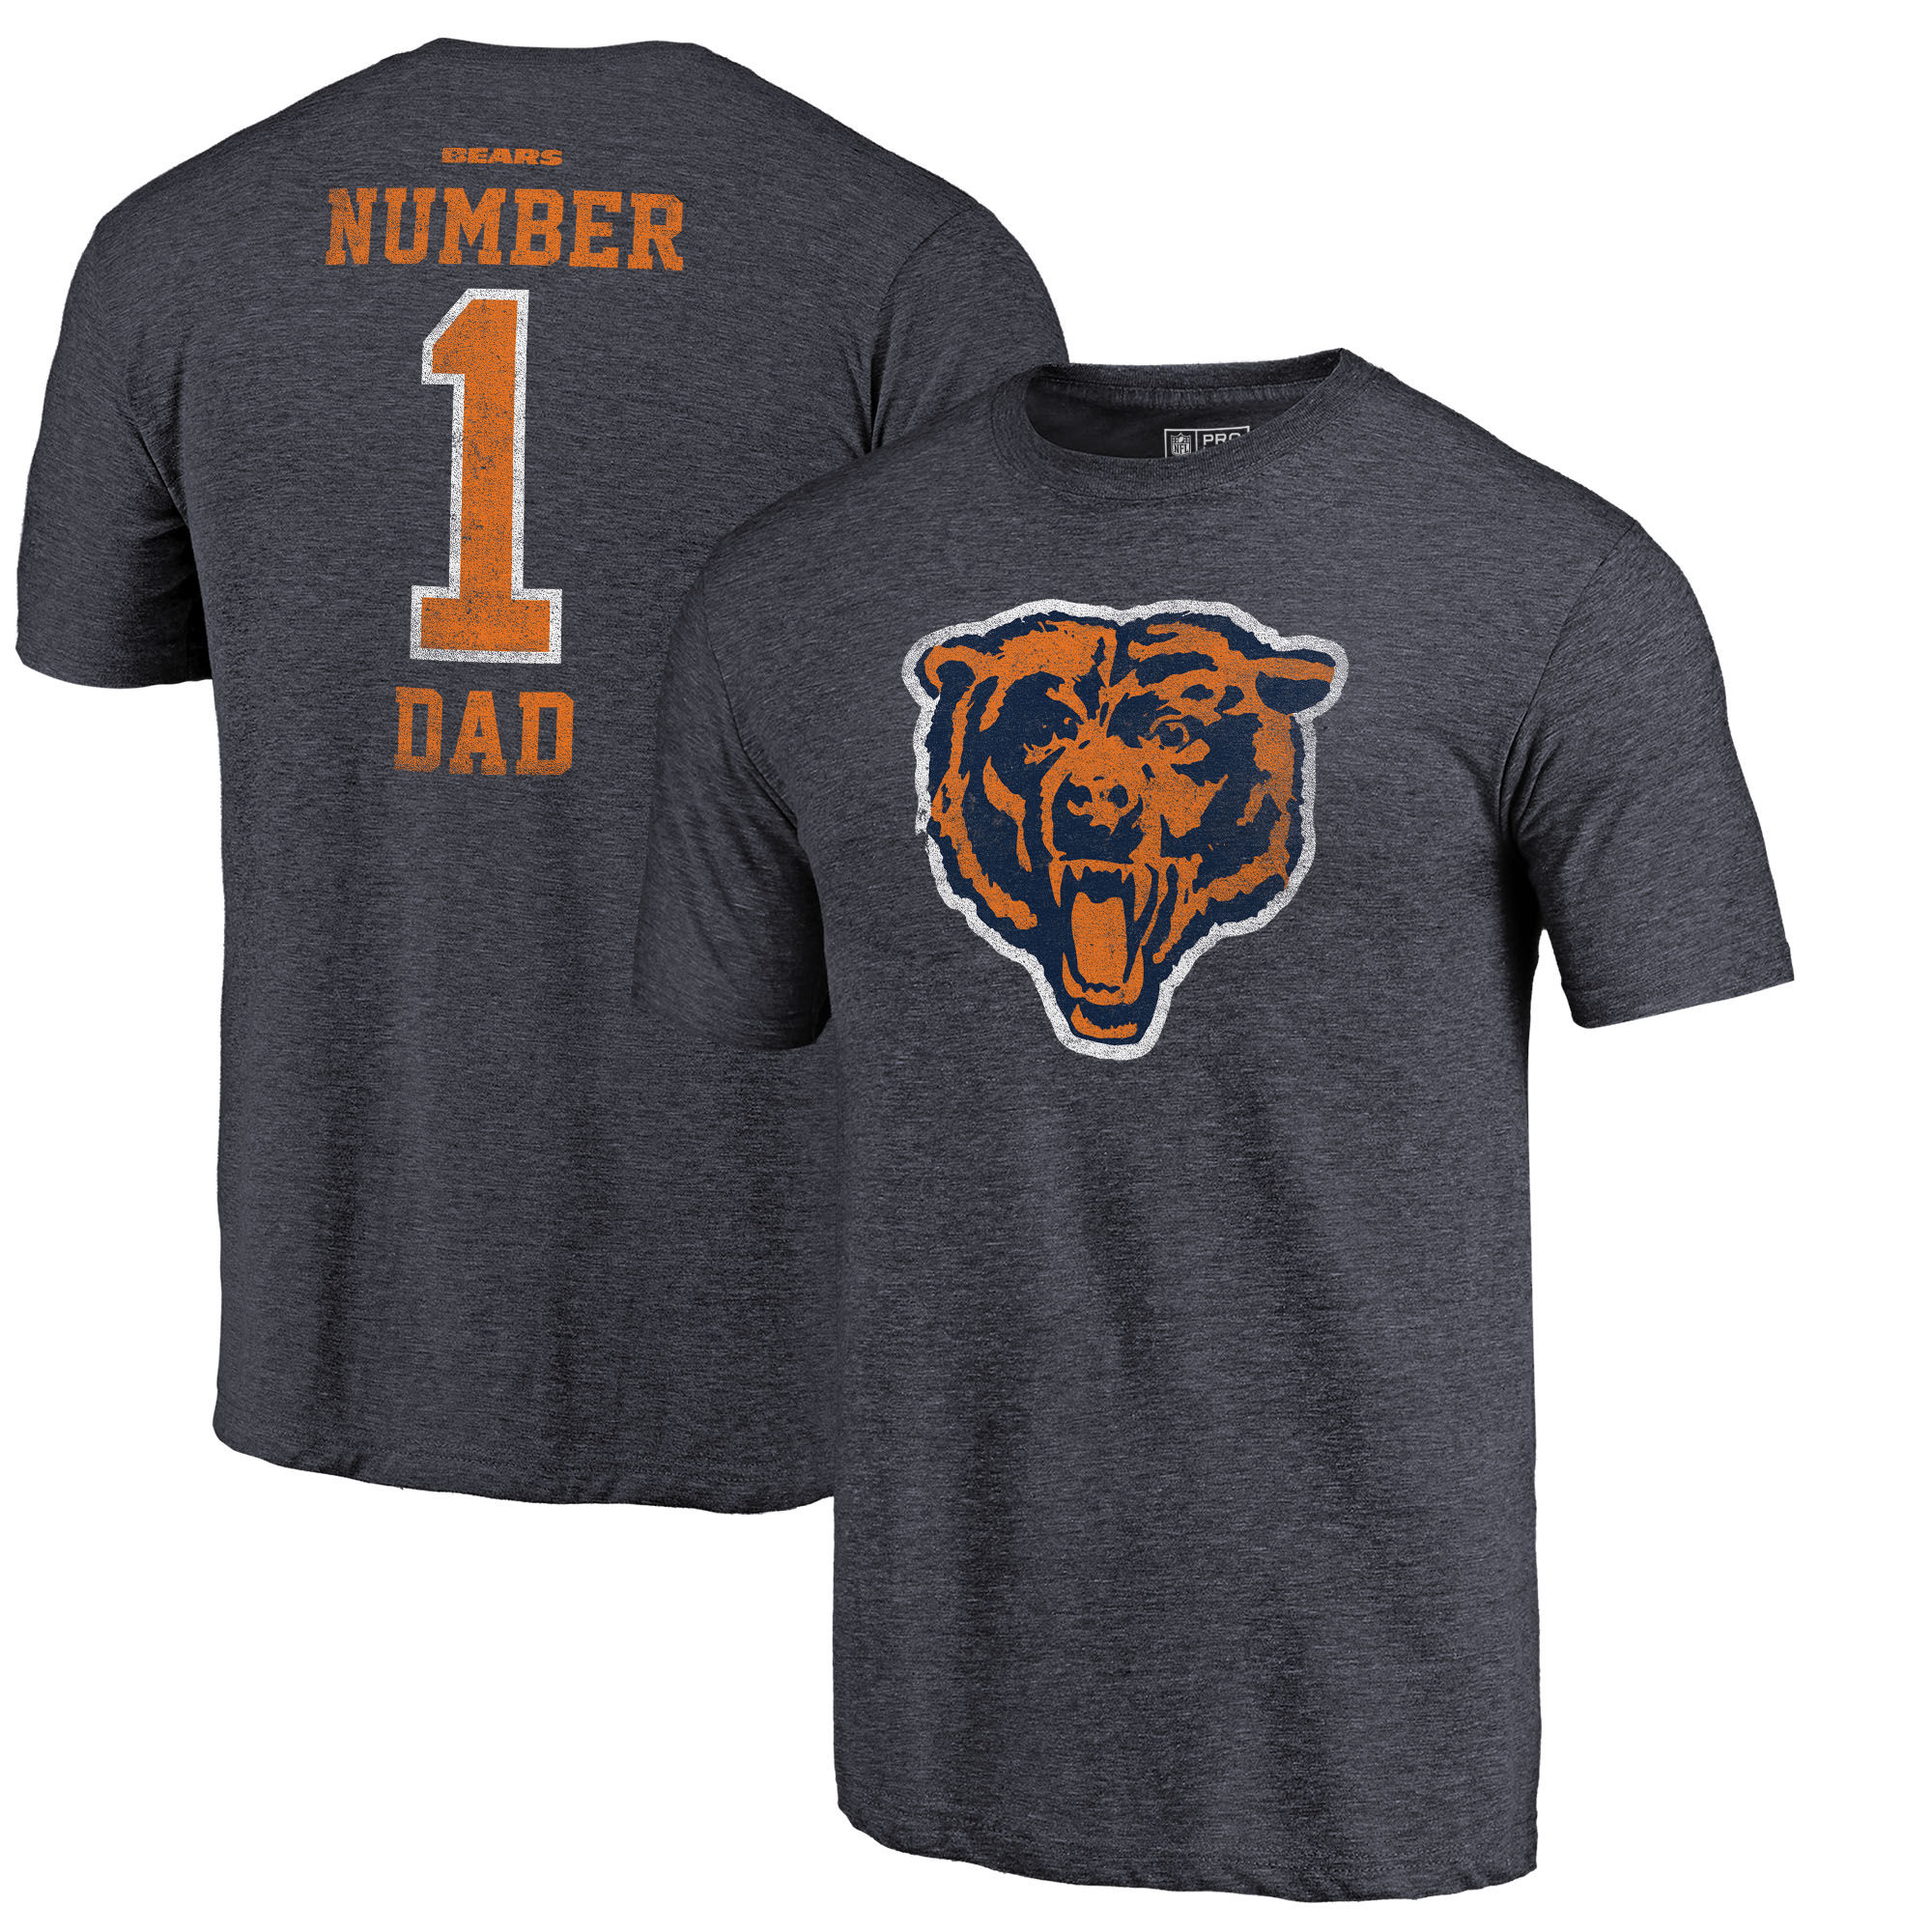 Chicago Bears NFL Pro Line by Fanatics Branded Navy Greatest Dad Retro Tri-Blend T-Shirt